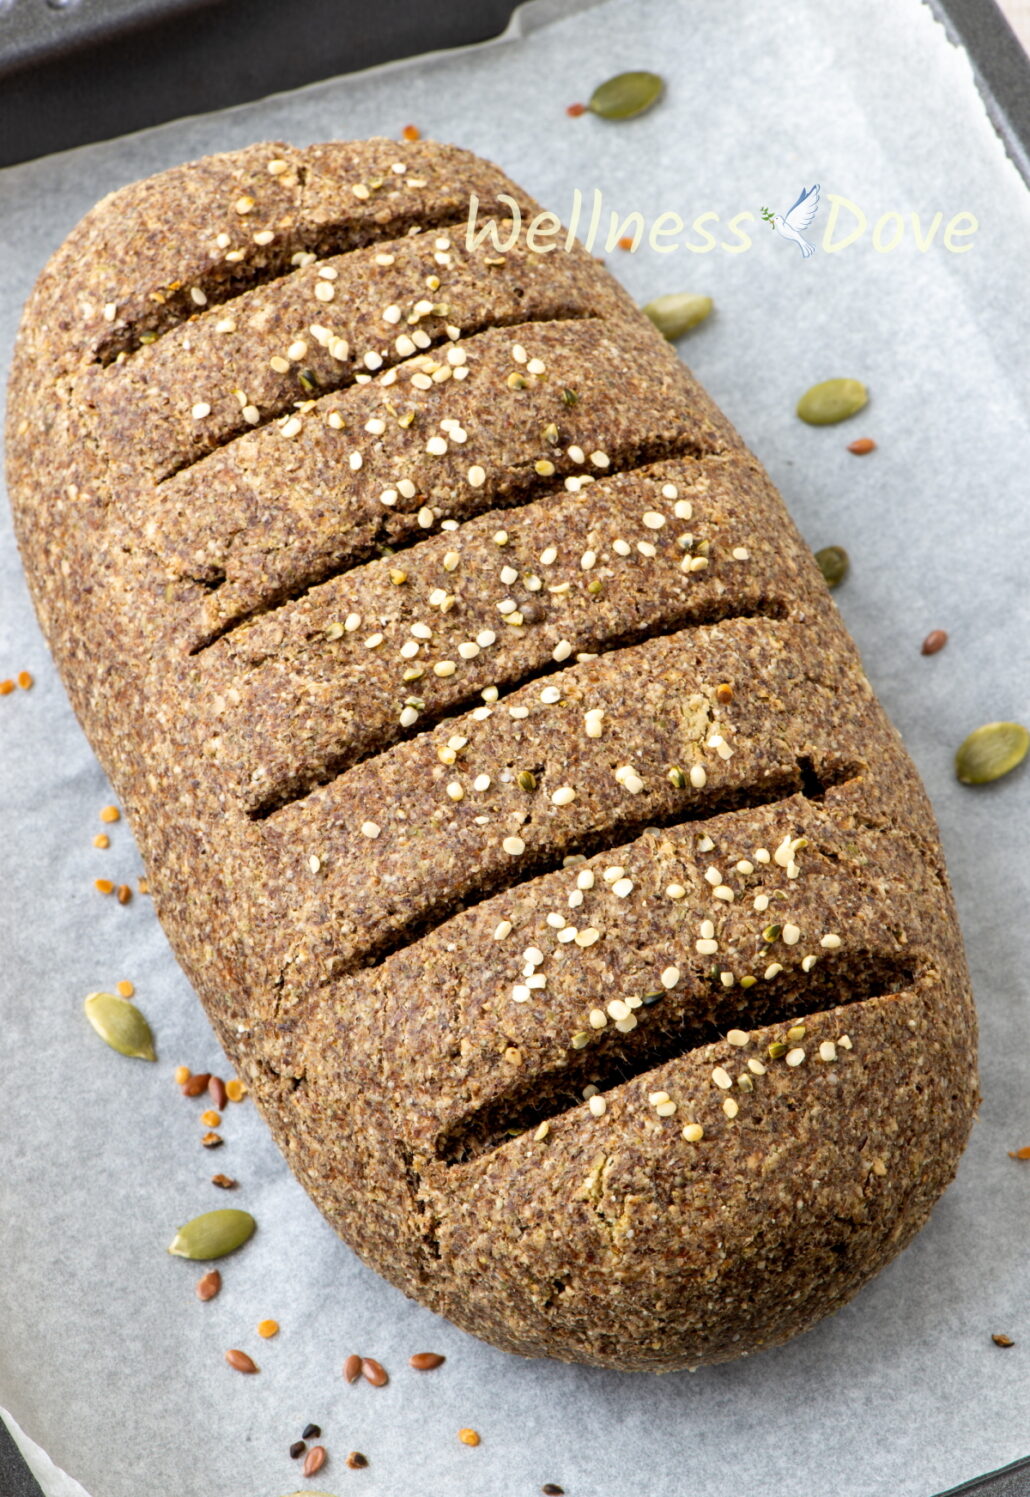 the vegan gluten free seeds bread on a baking tray